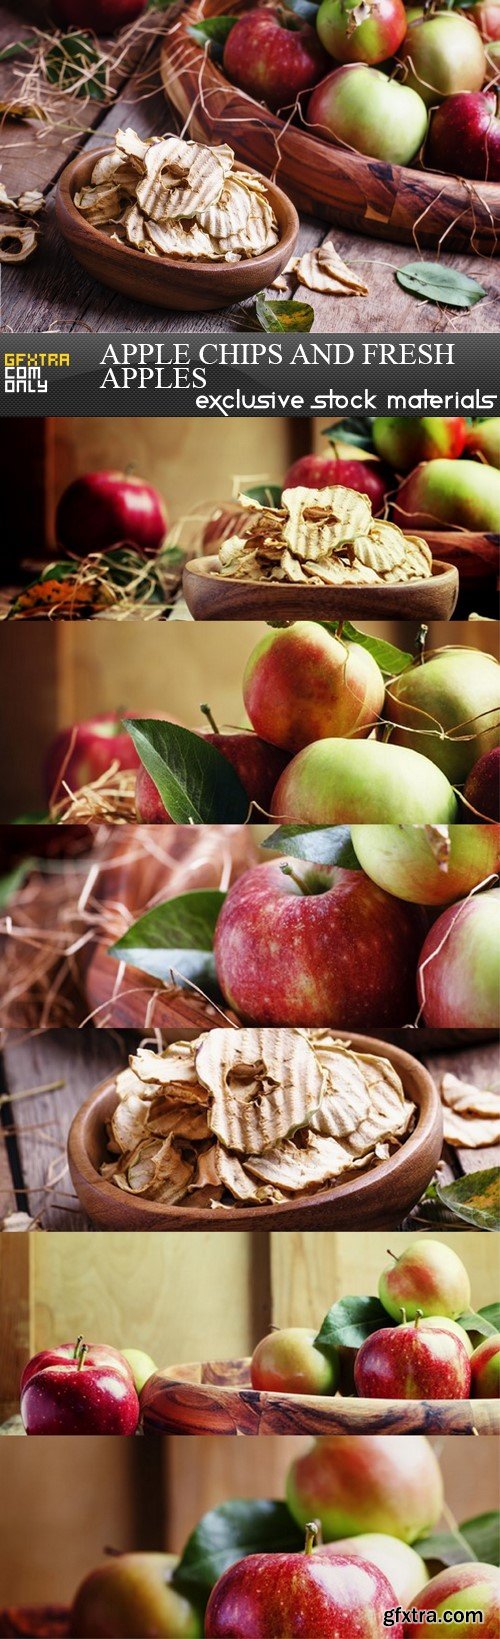 Apple Chips And Fresh Apples - 7 UHQ JPEG